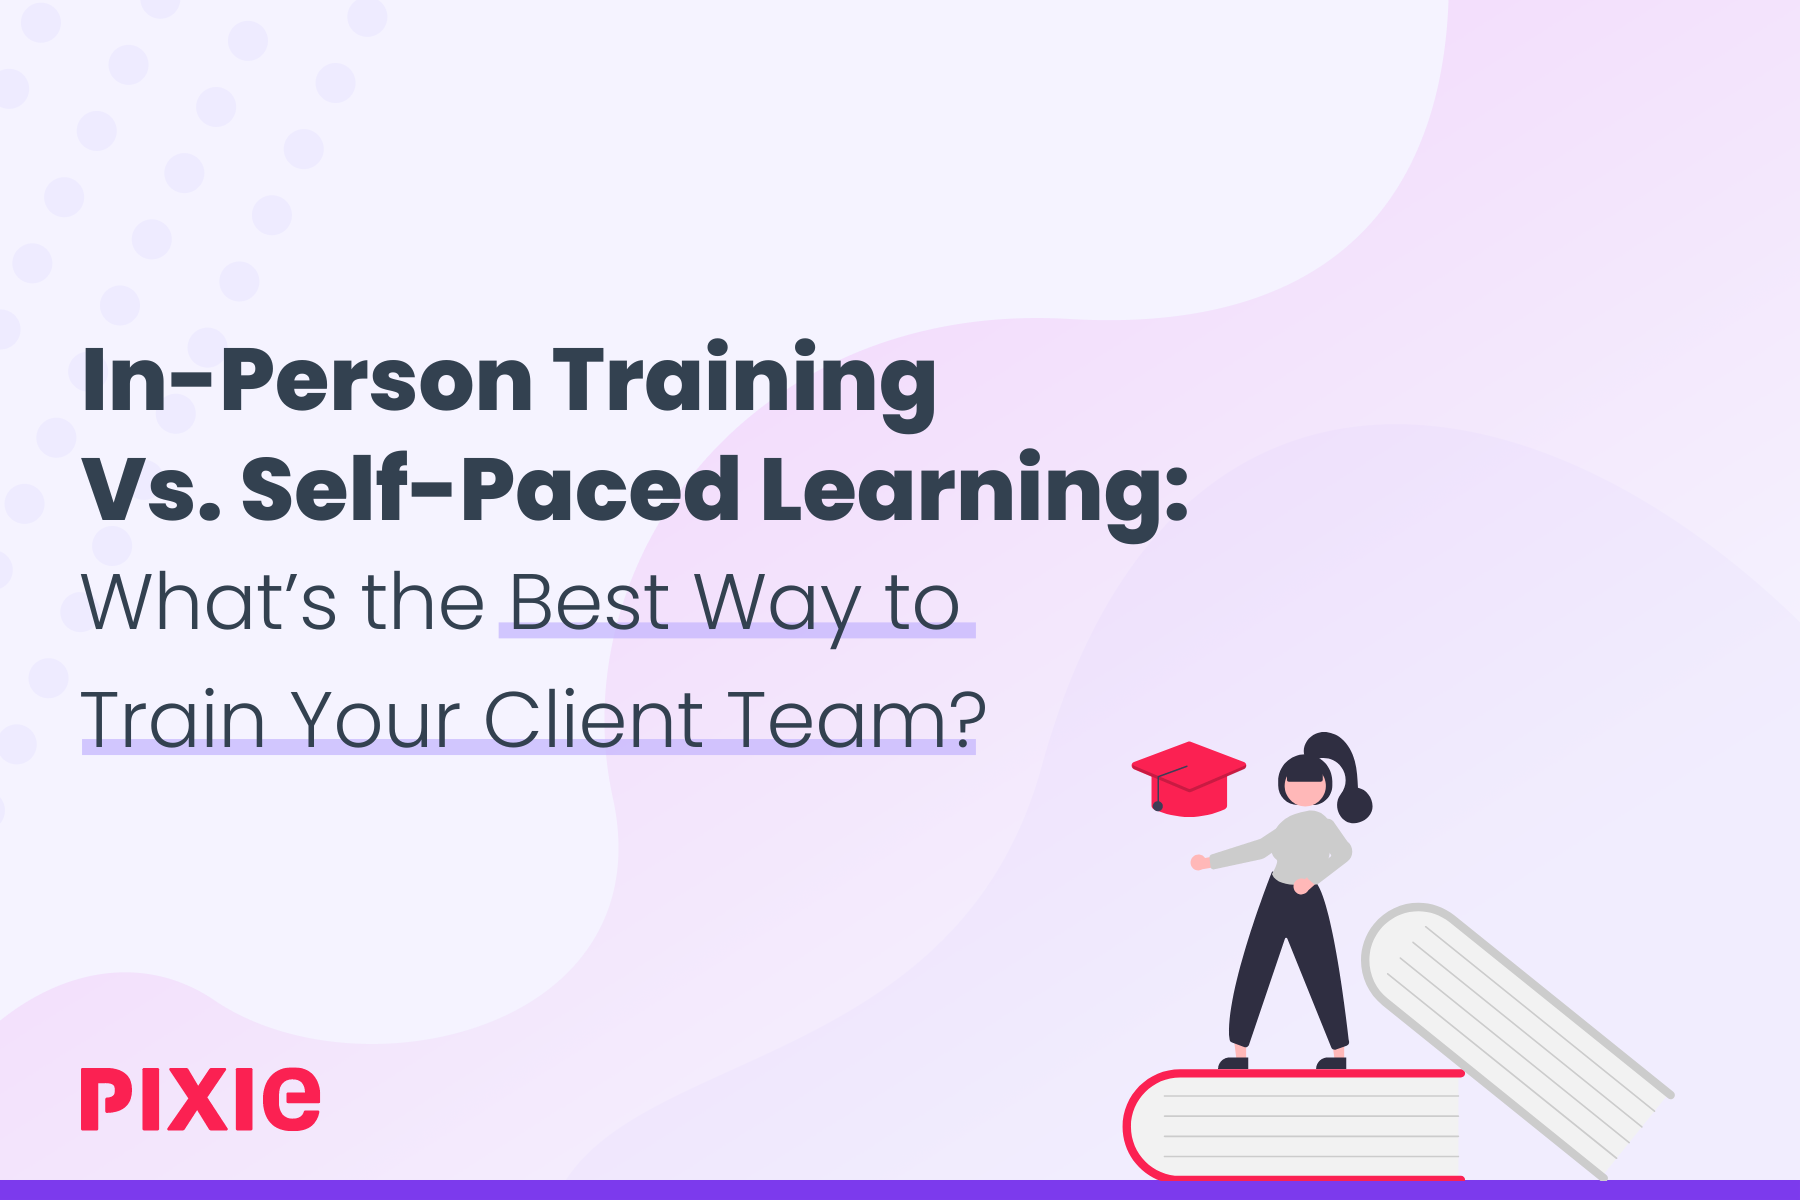 In-Person Training Vs Self-Paced Learning: What’s the Best Way to Train Your Client Team?